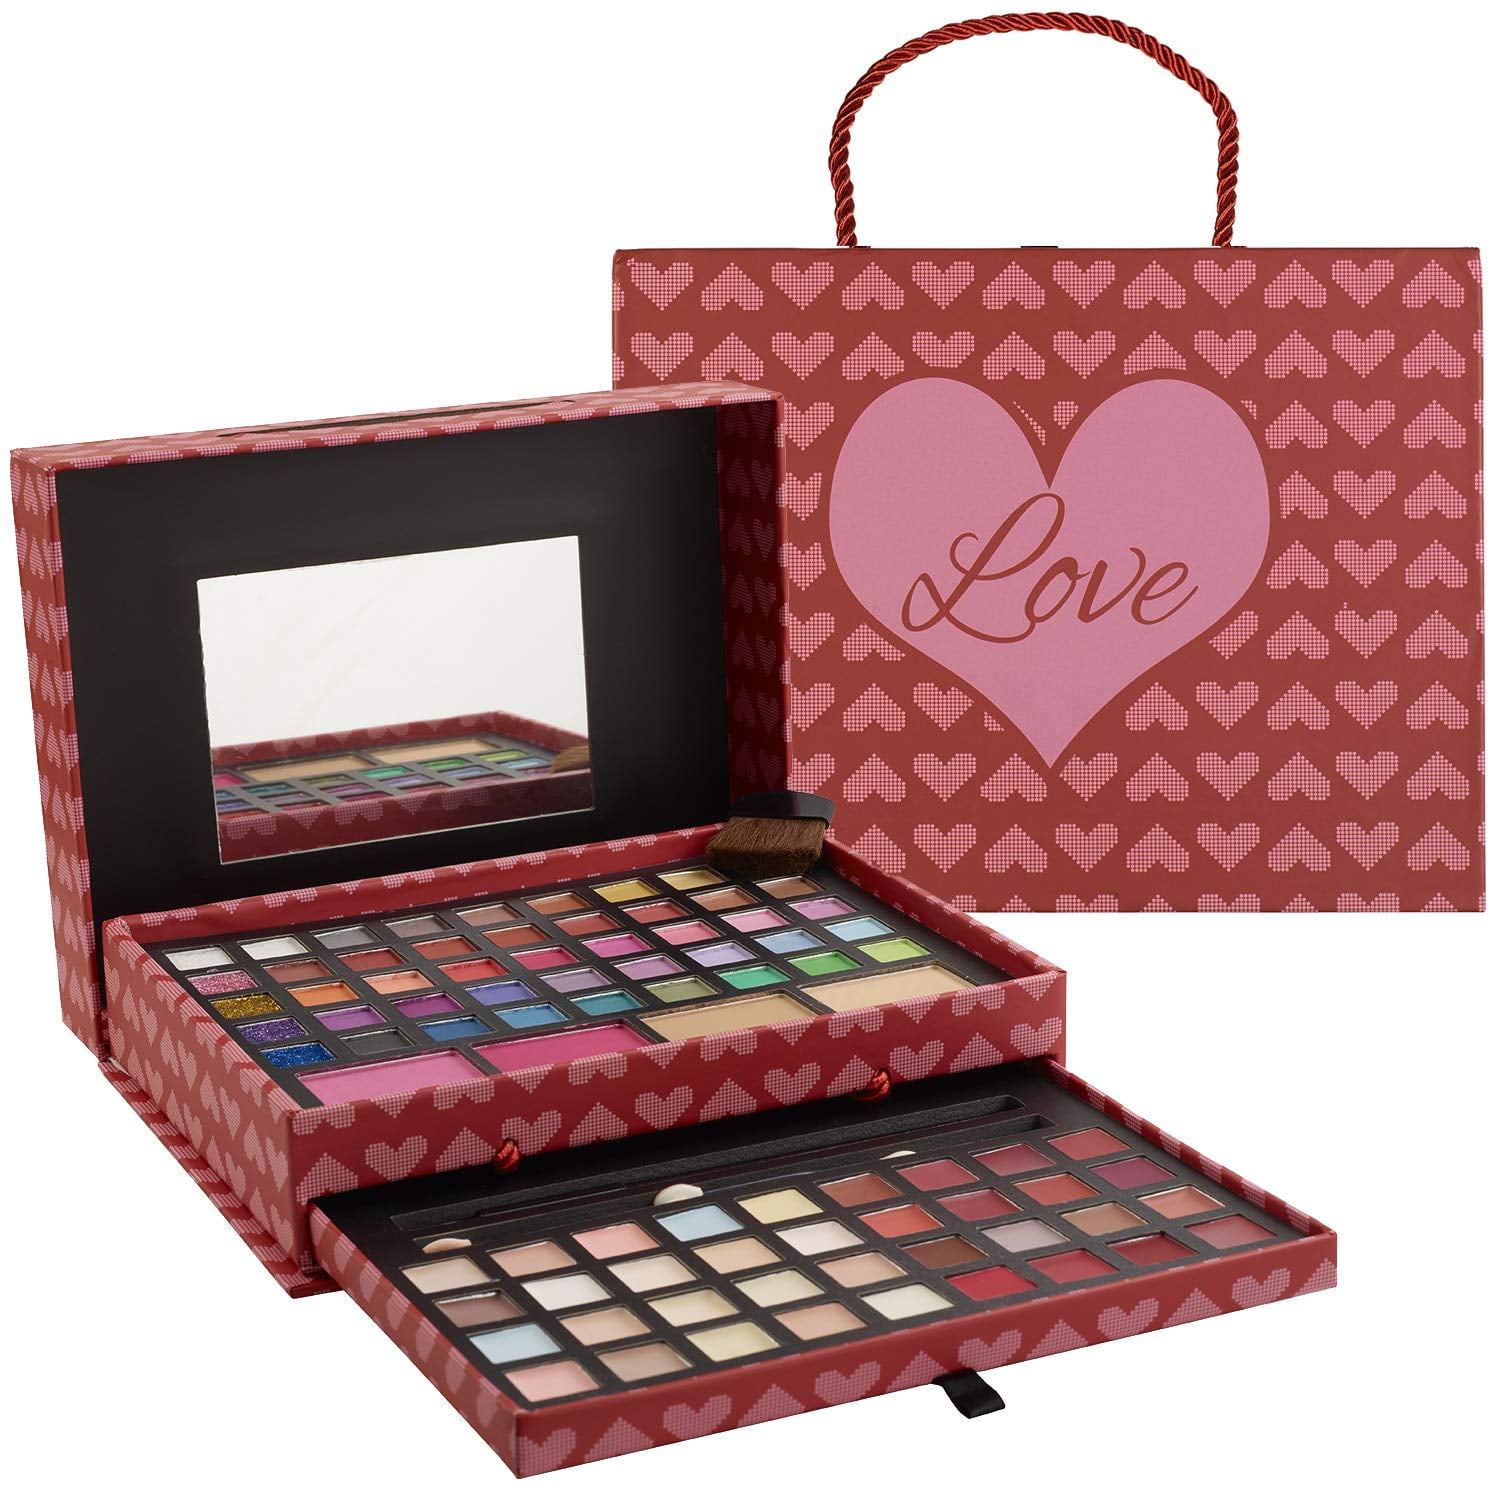 Makeup for Teens - 2-Tier Make Gift Set and Eyeshadow Palette for Teen Girls and Juniors -Variety Shade Array - Full Starter Kit for Beginners or Pros by Toysical -